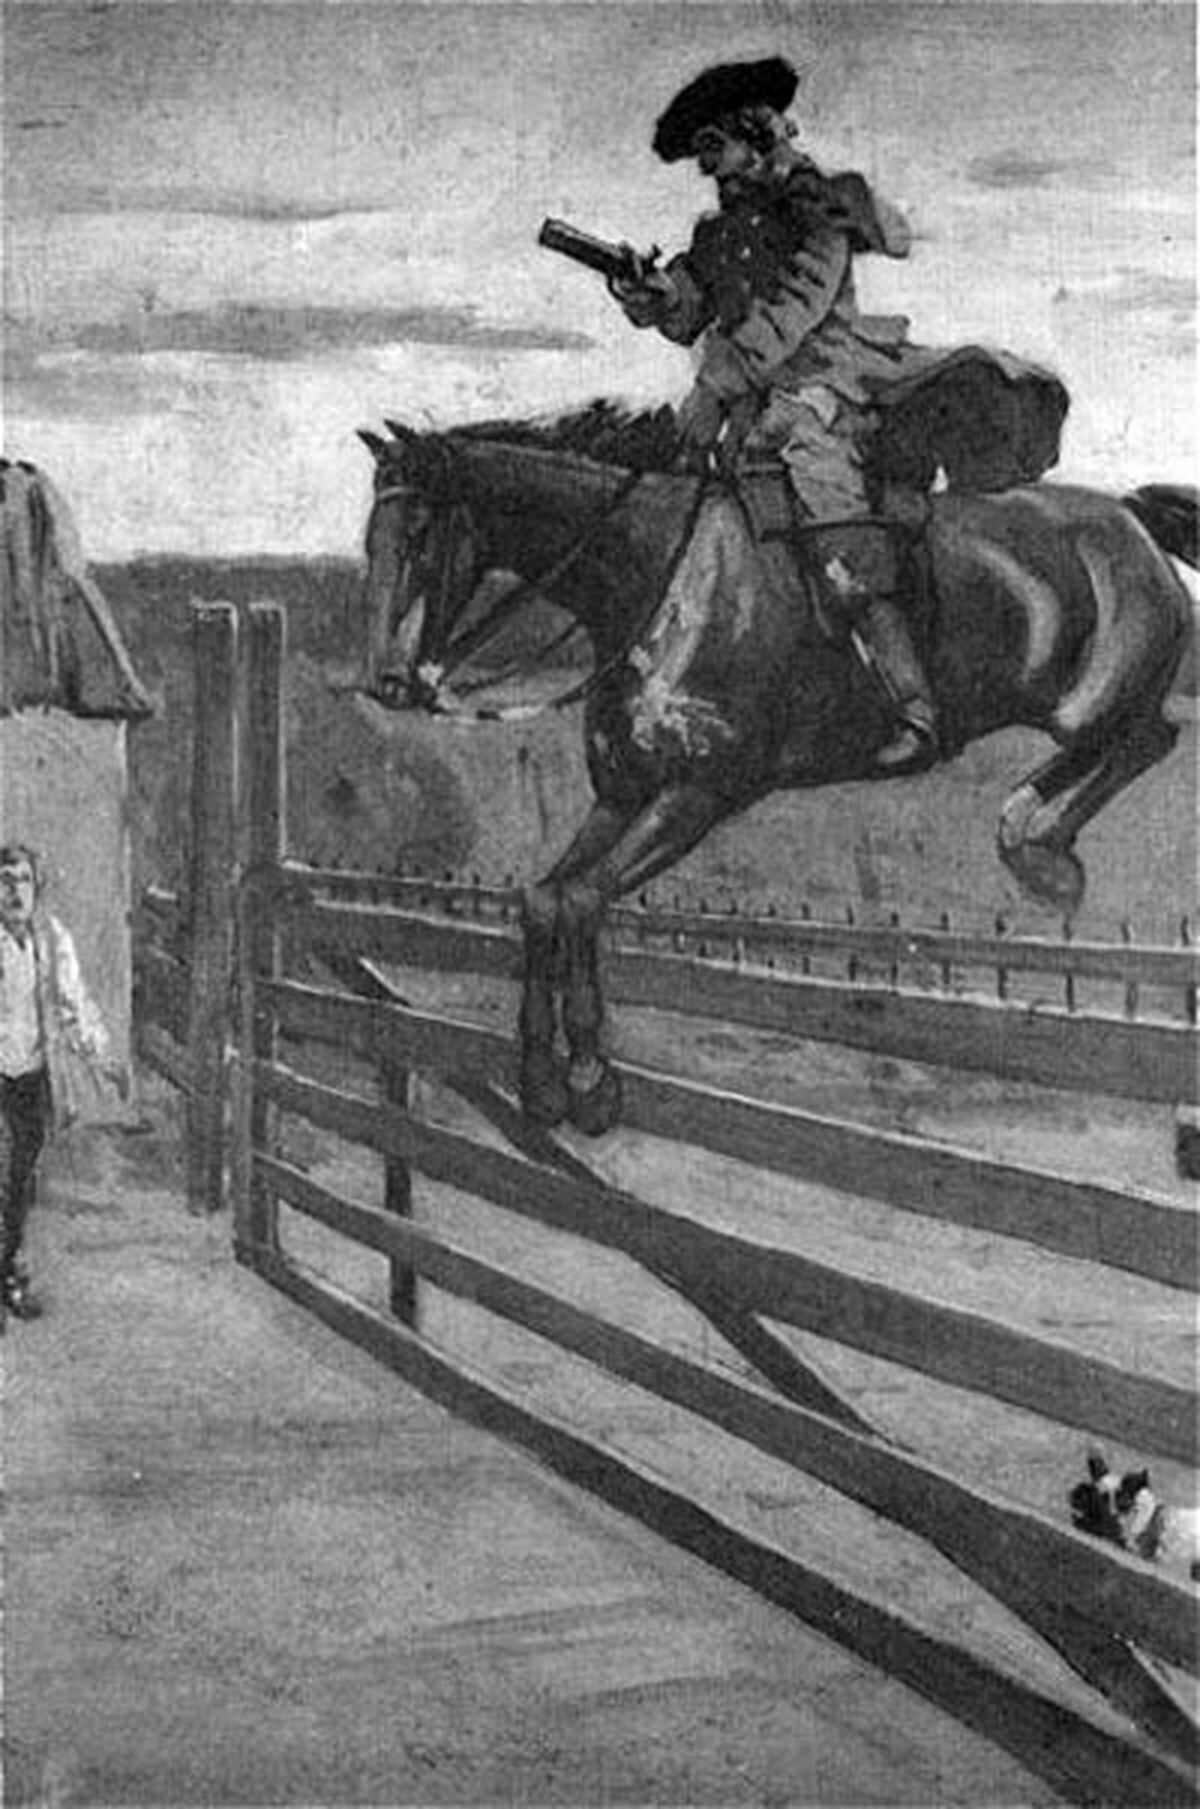 Dick Turpin as imagined in the novel Rookwood